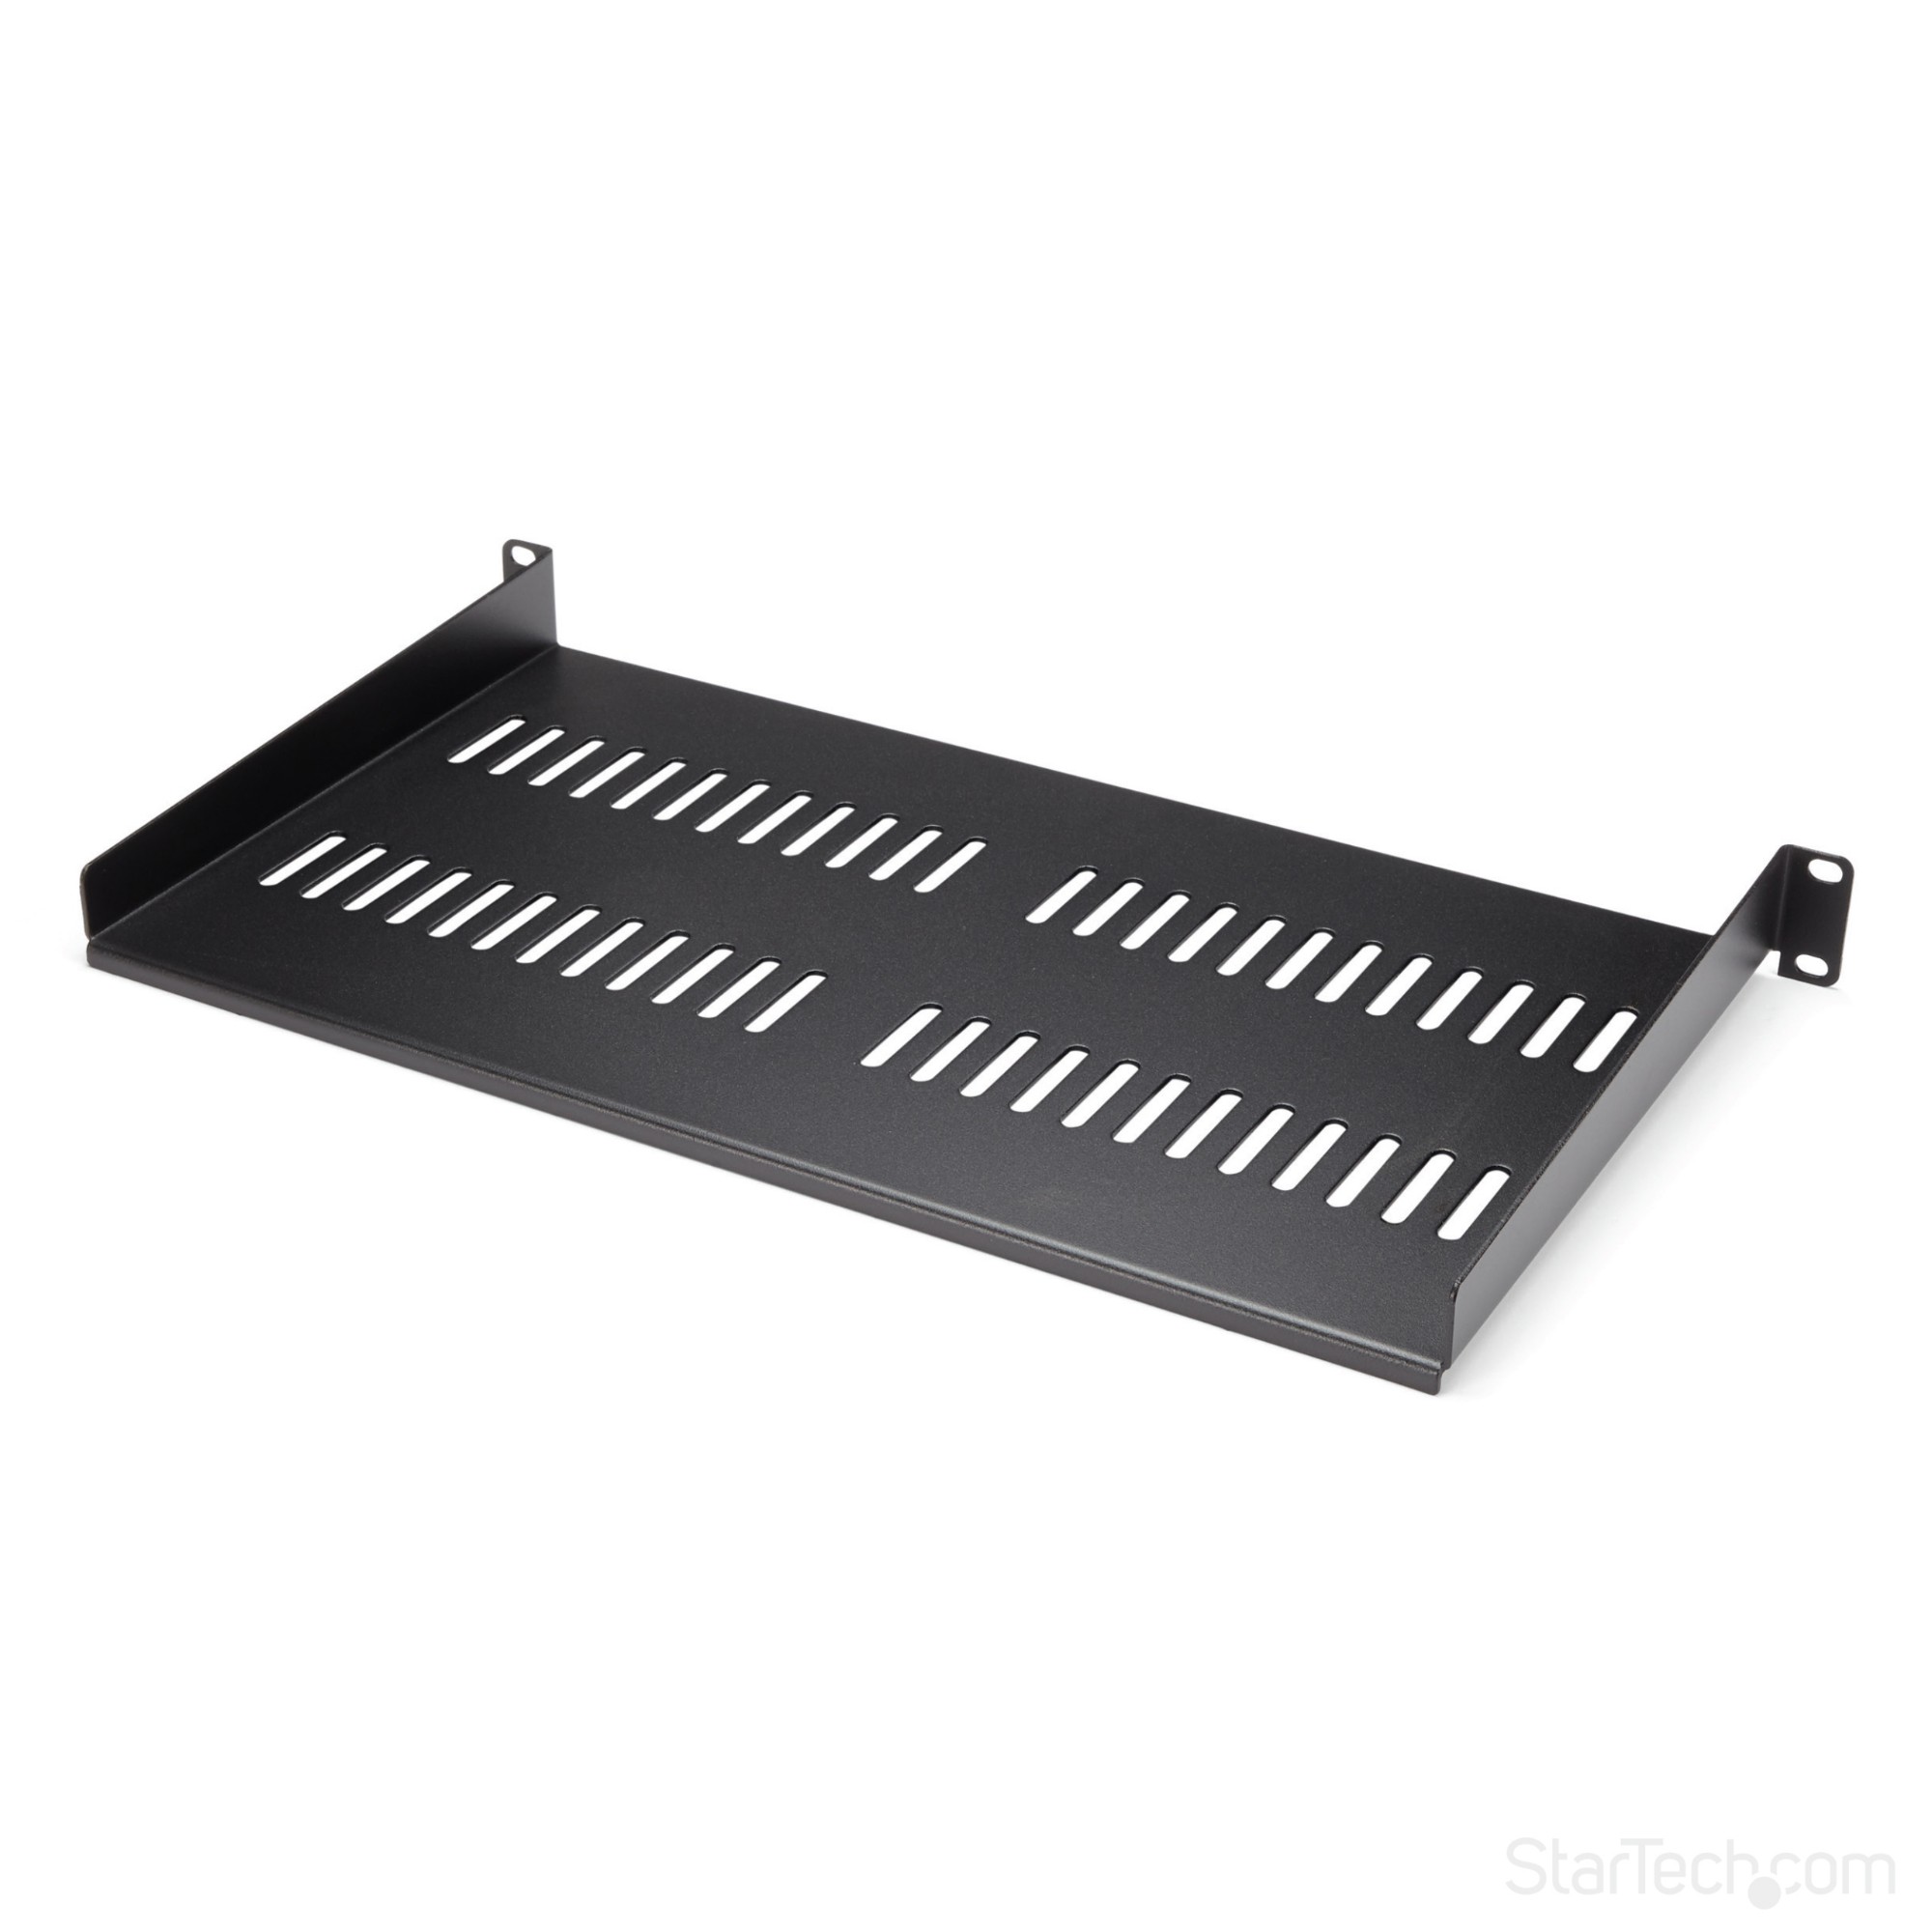 StarTech.com 1U Vented Server Rack Cabinet Shelf - 10in Deep Fixed Cantilever Tray - Rackmount Shelf for 19&quot; AV/Data/Network Equipment Enclosure with Cage Nuts &amp; Screws - 44lbs capacity